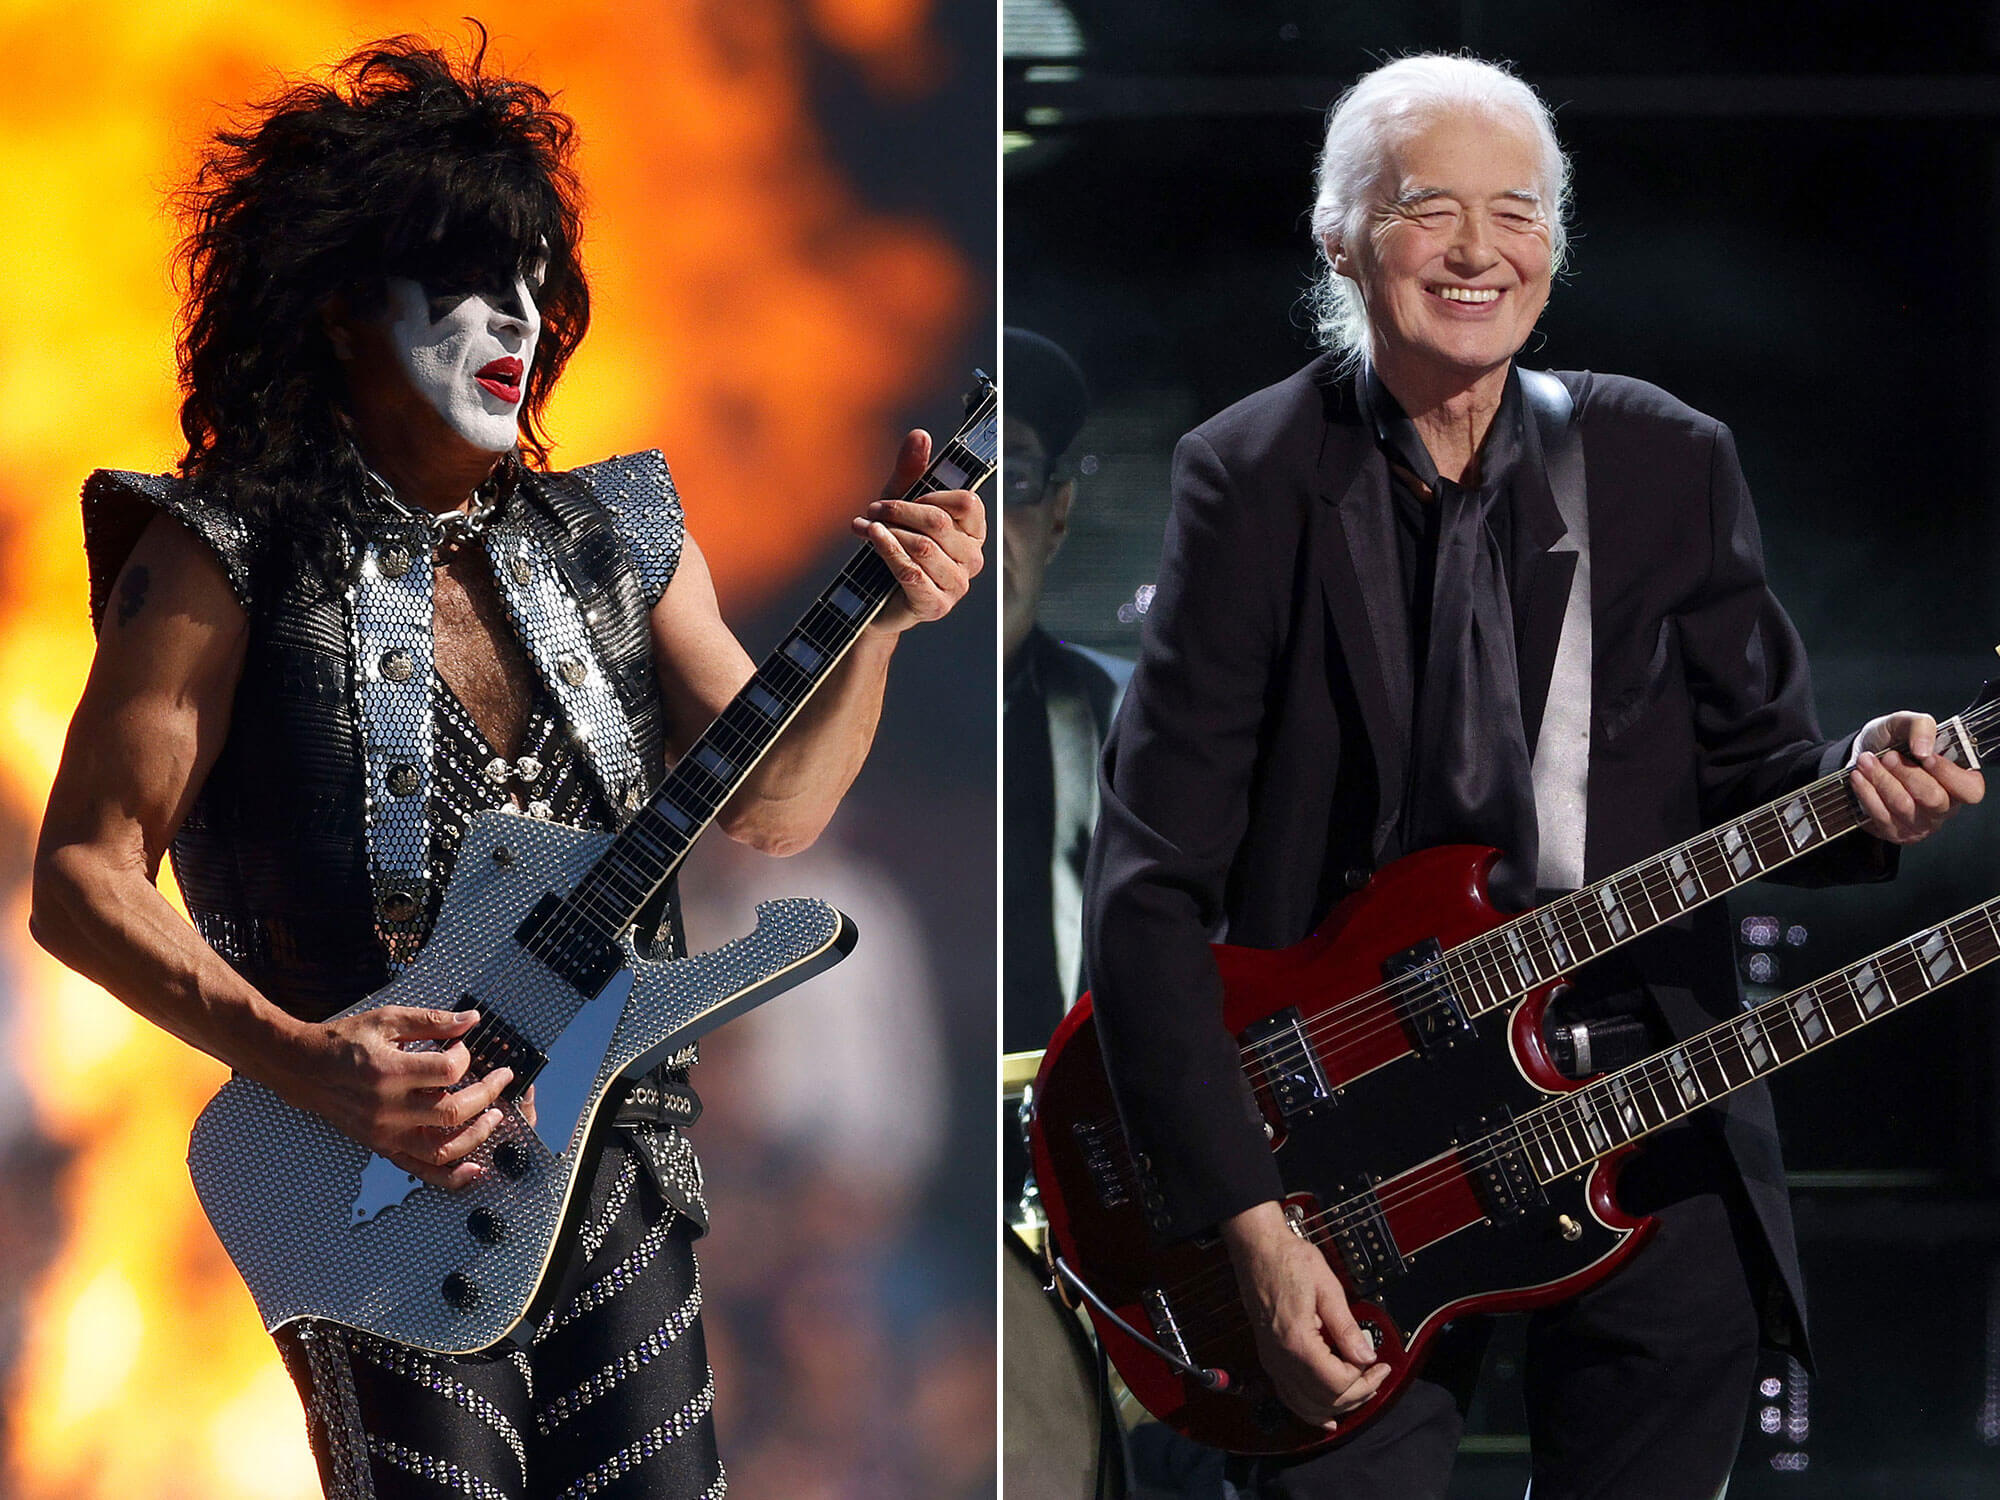 [L-R] Paul Stanley and Jimmy Page